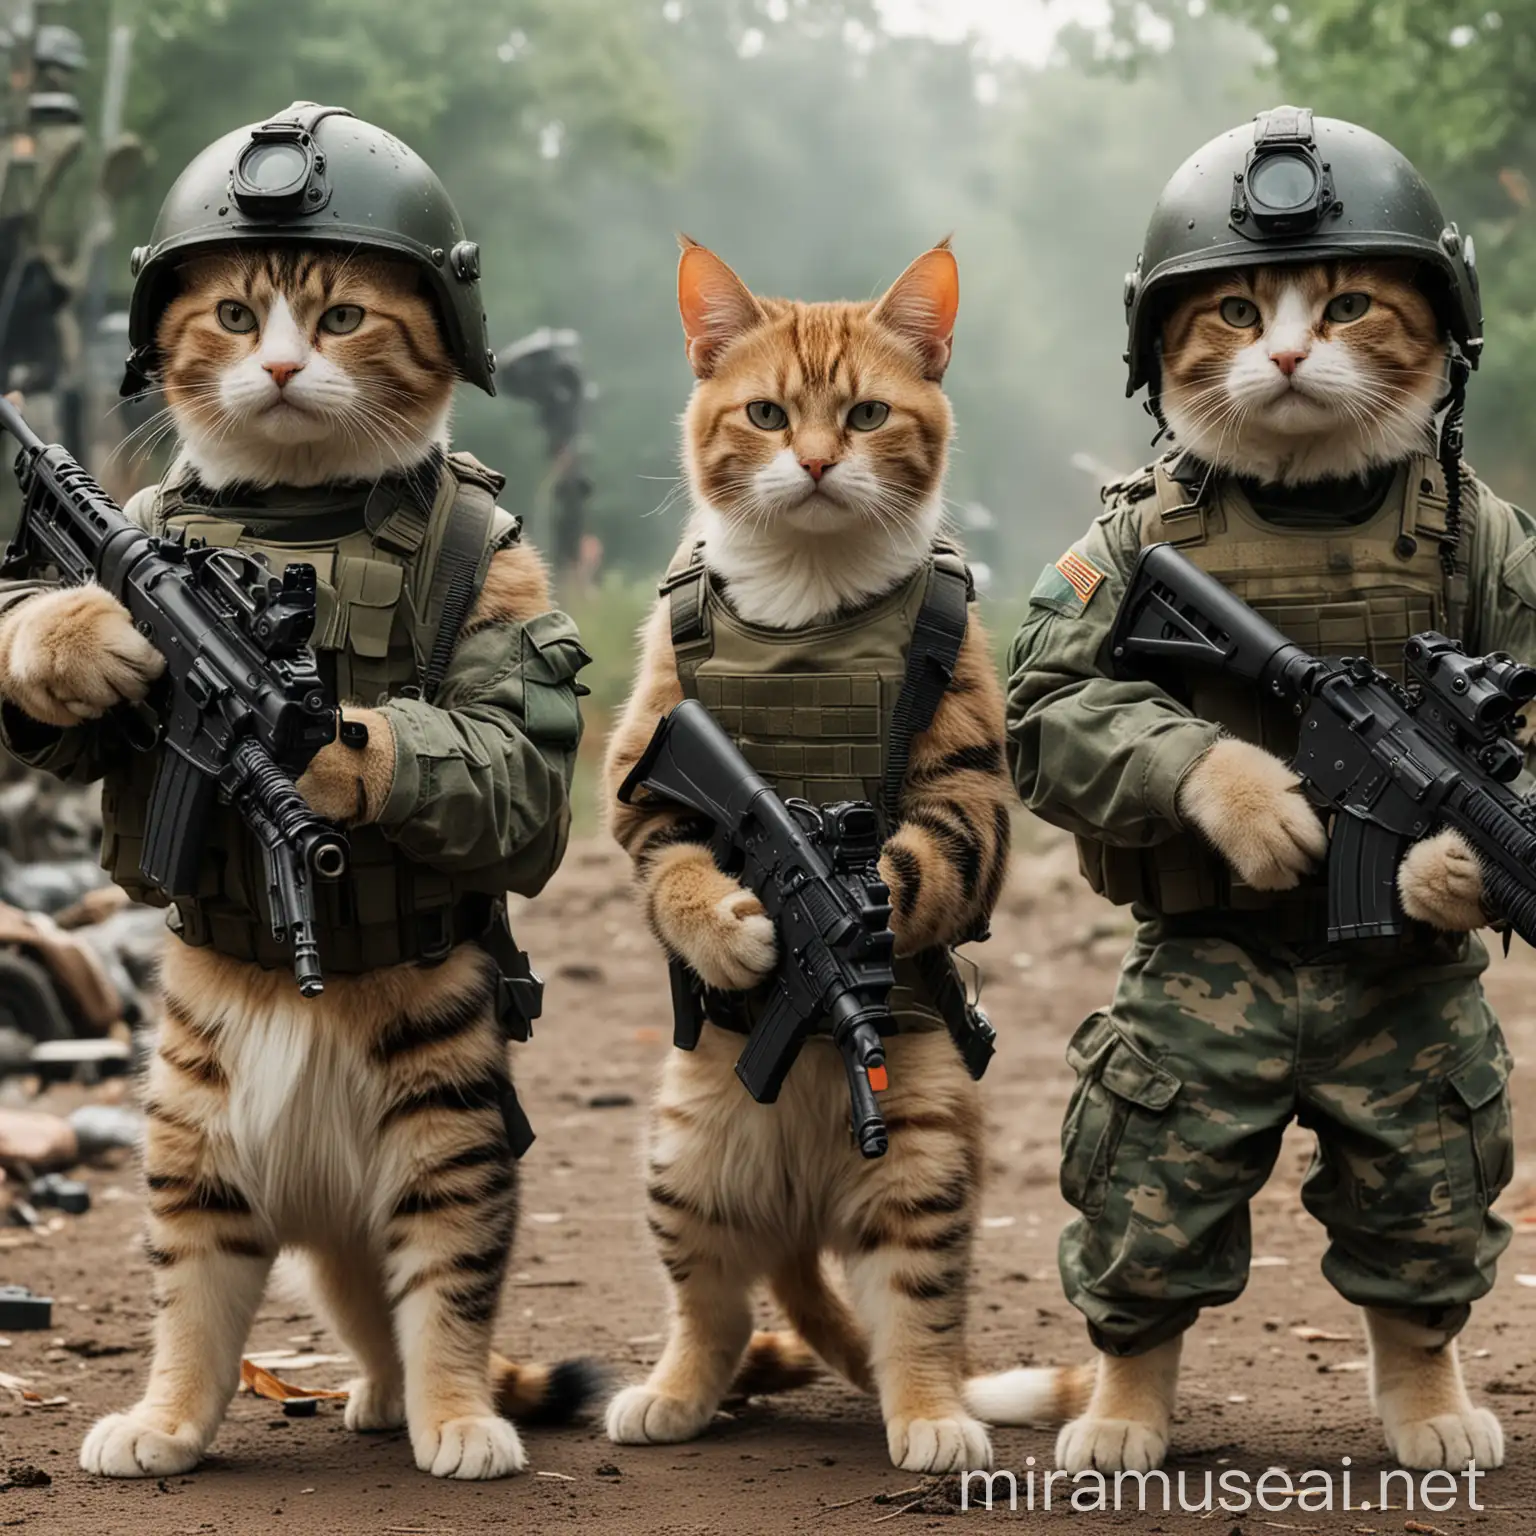 a 90s movie scene with 2 military cats with guns on them, and one with a military helmet on